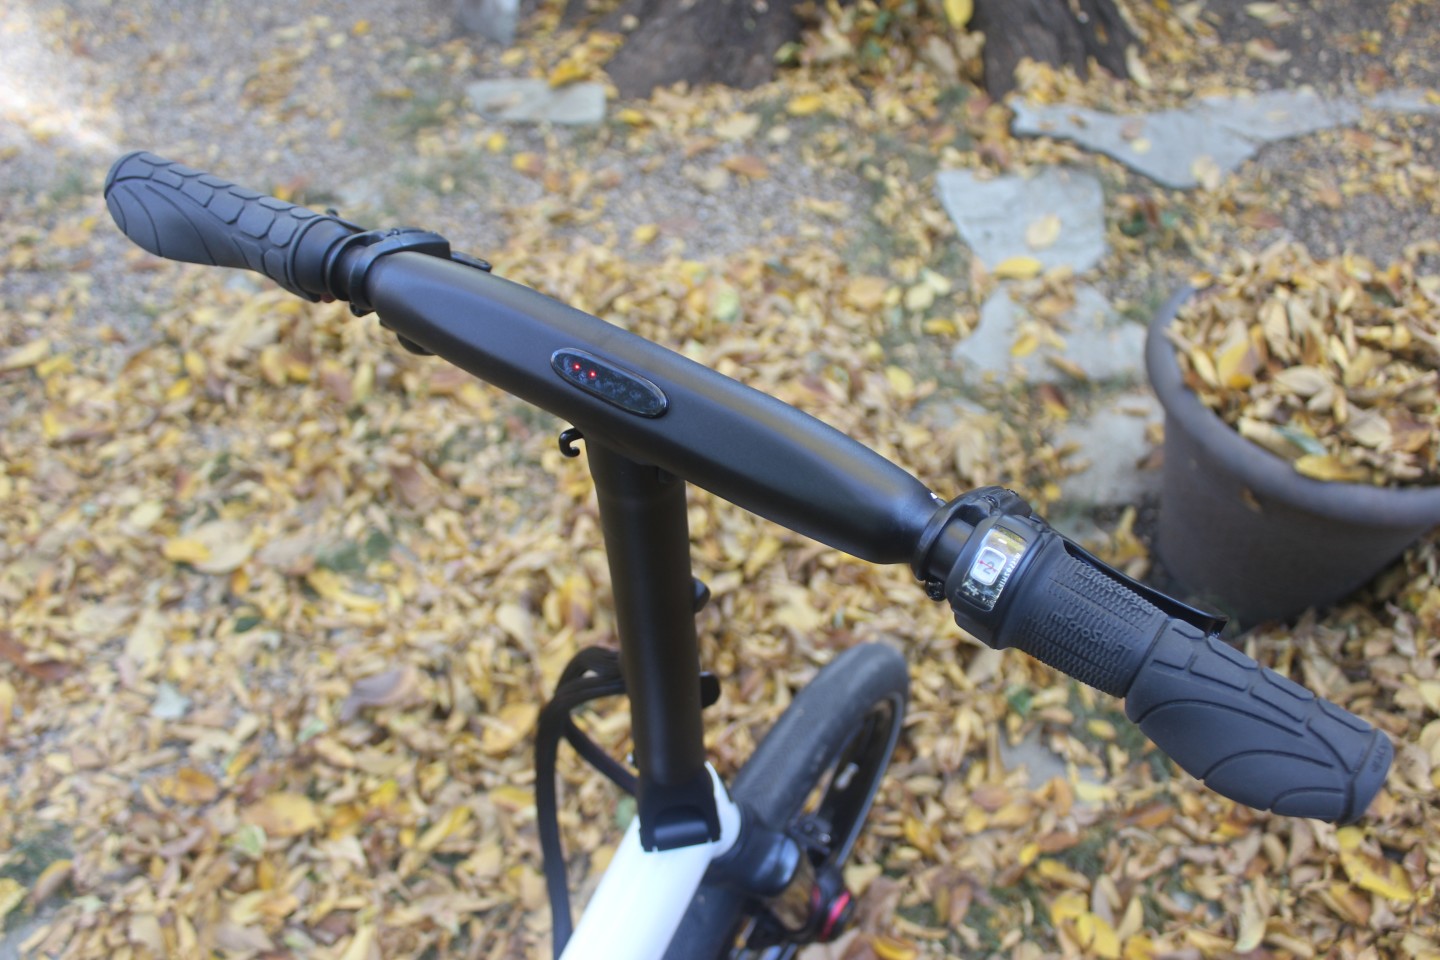 Time for a recharge – LEDs on the handlebar indicate the battery level